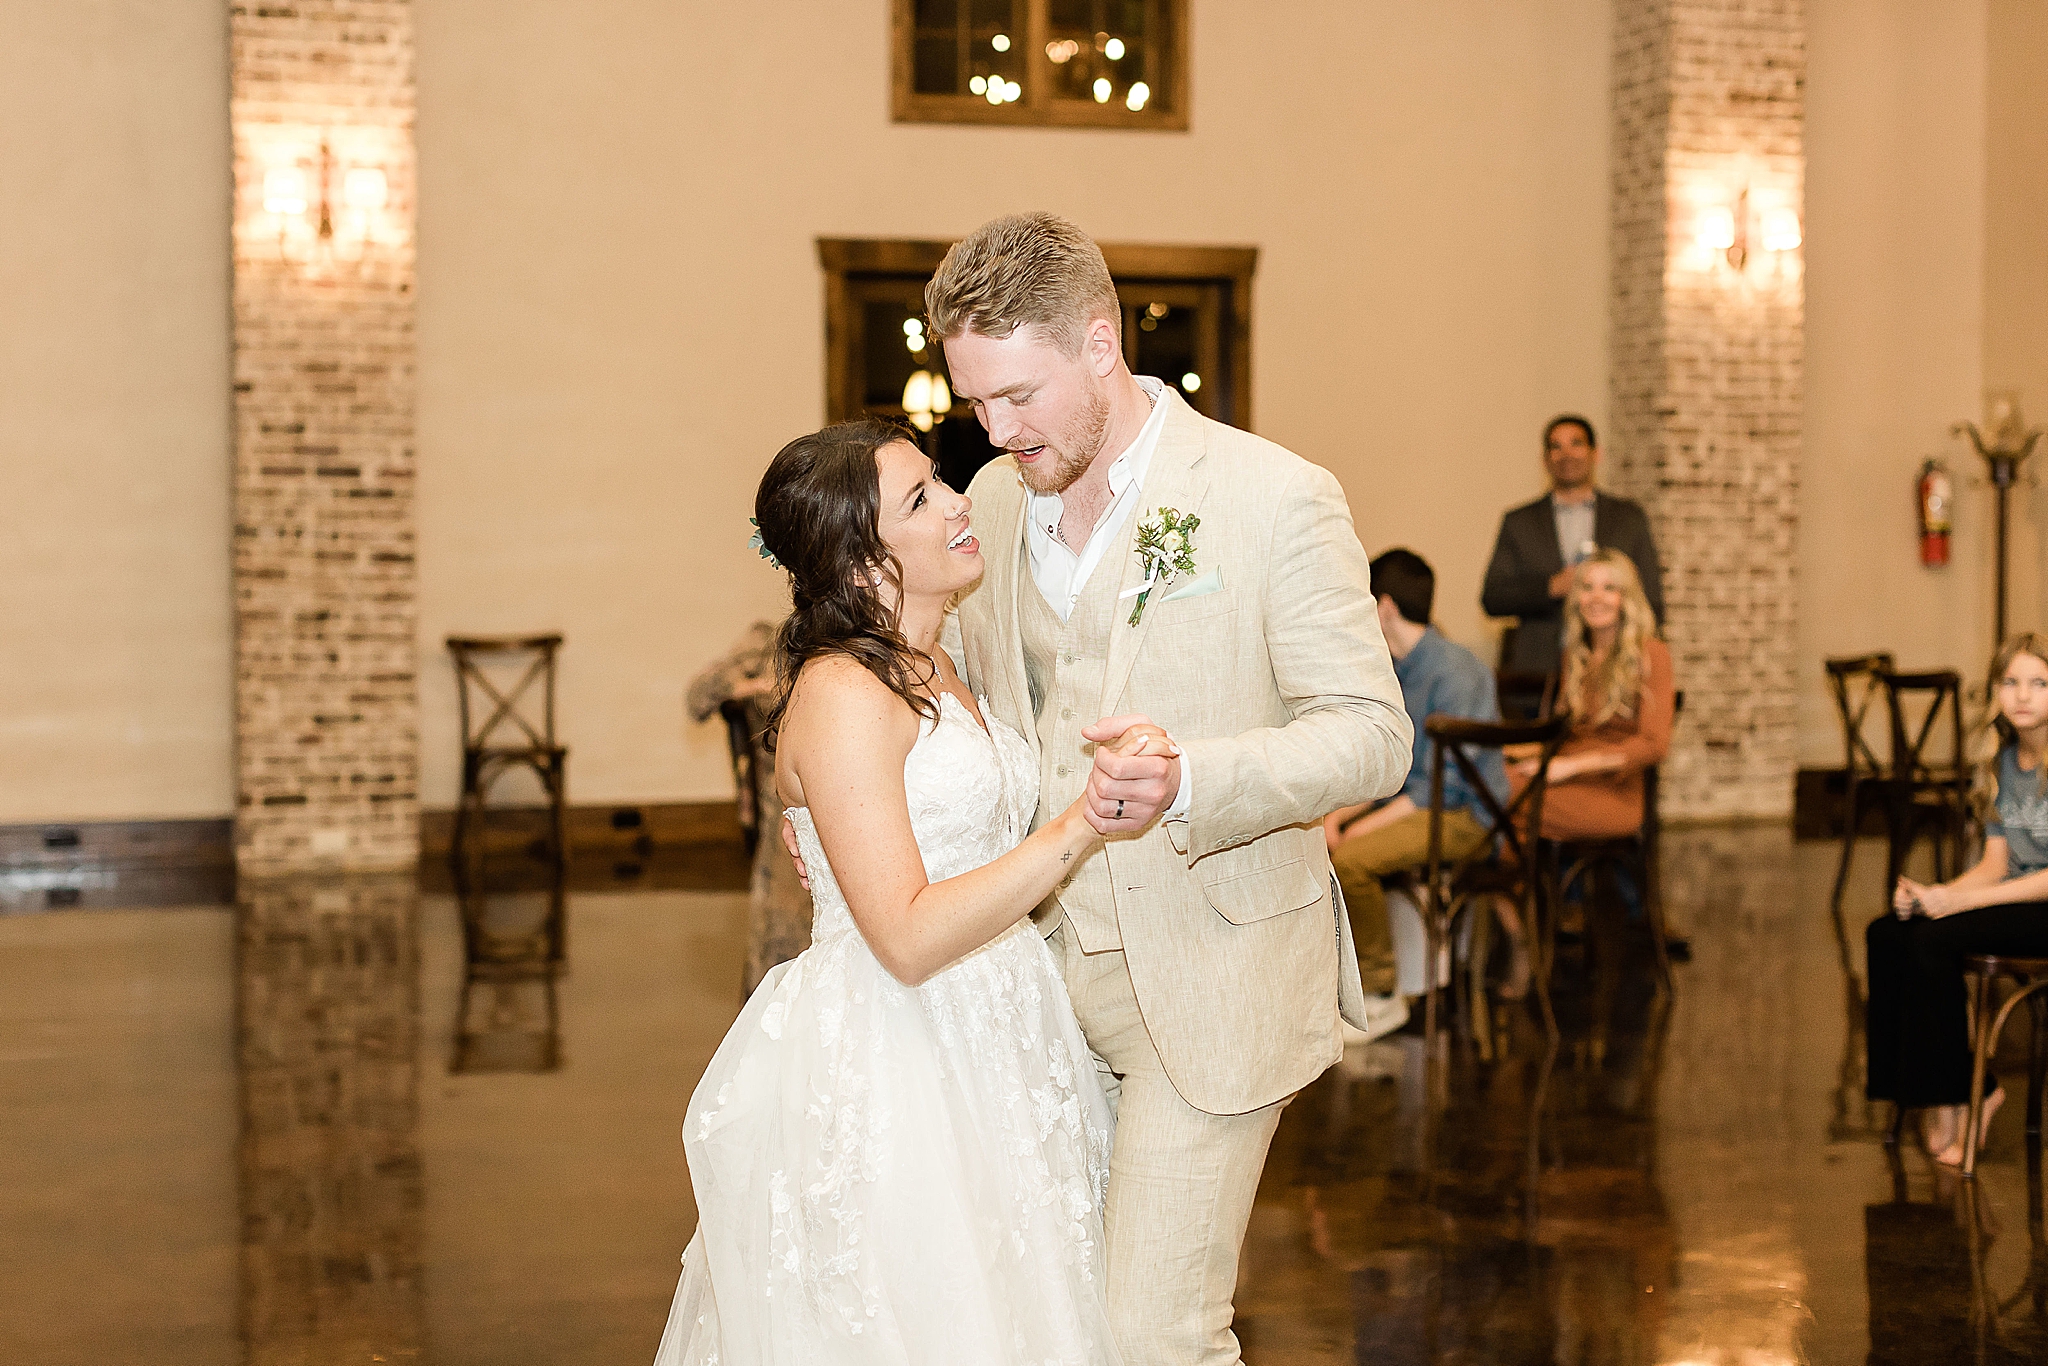 bride and groom dance toegther during Texas wedding reception